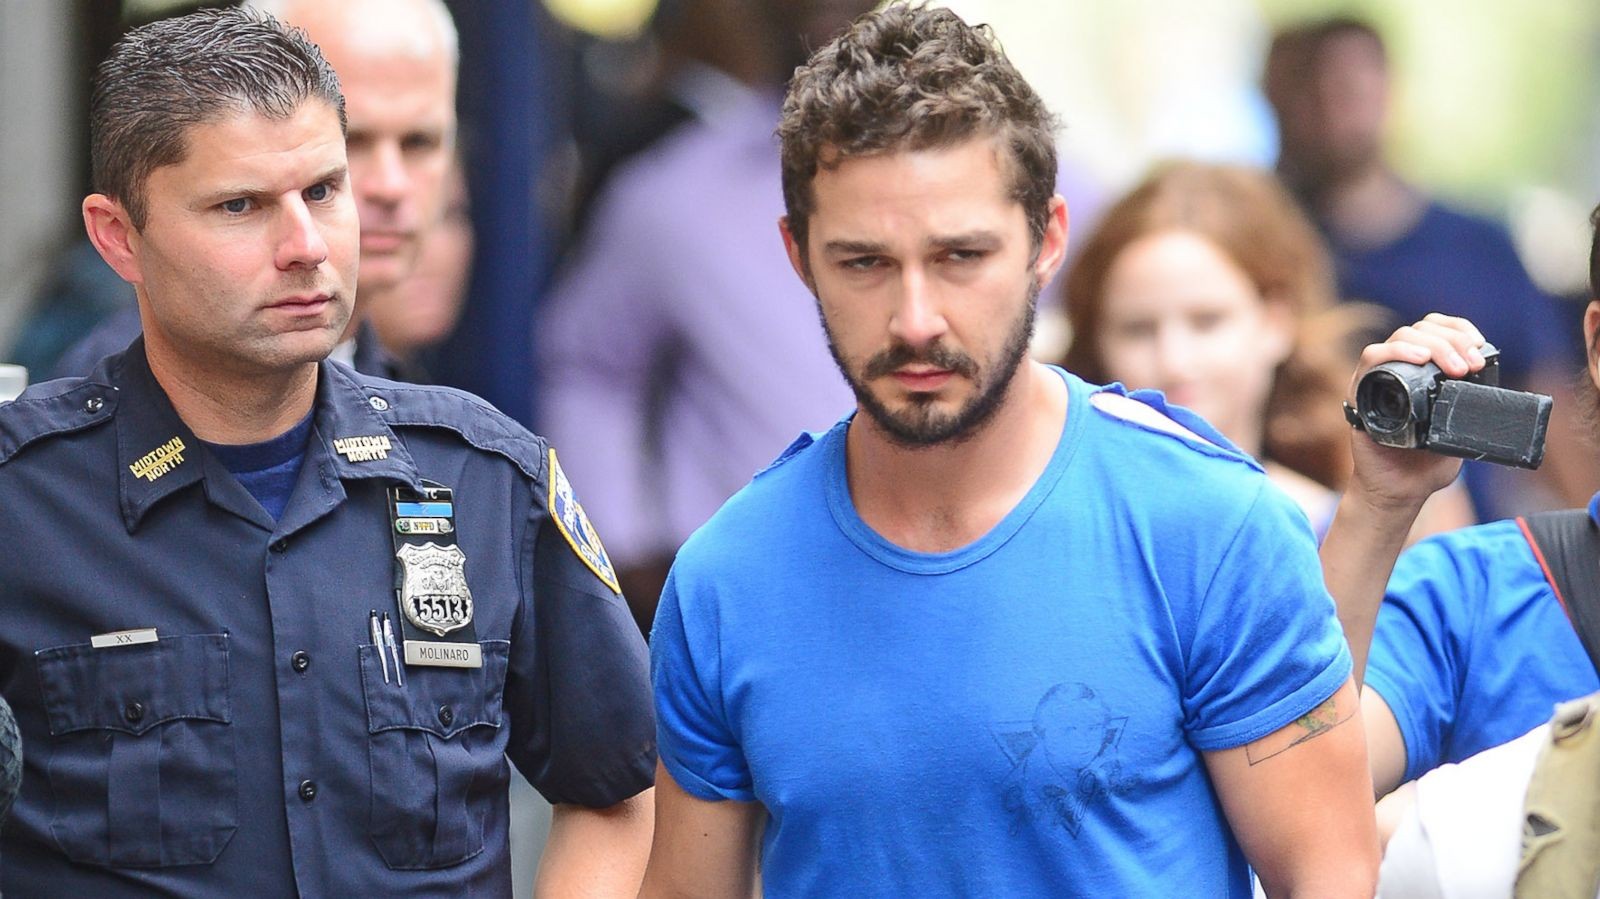 LaBeouf has been arrested multiple times